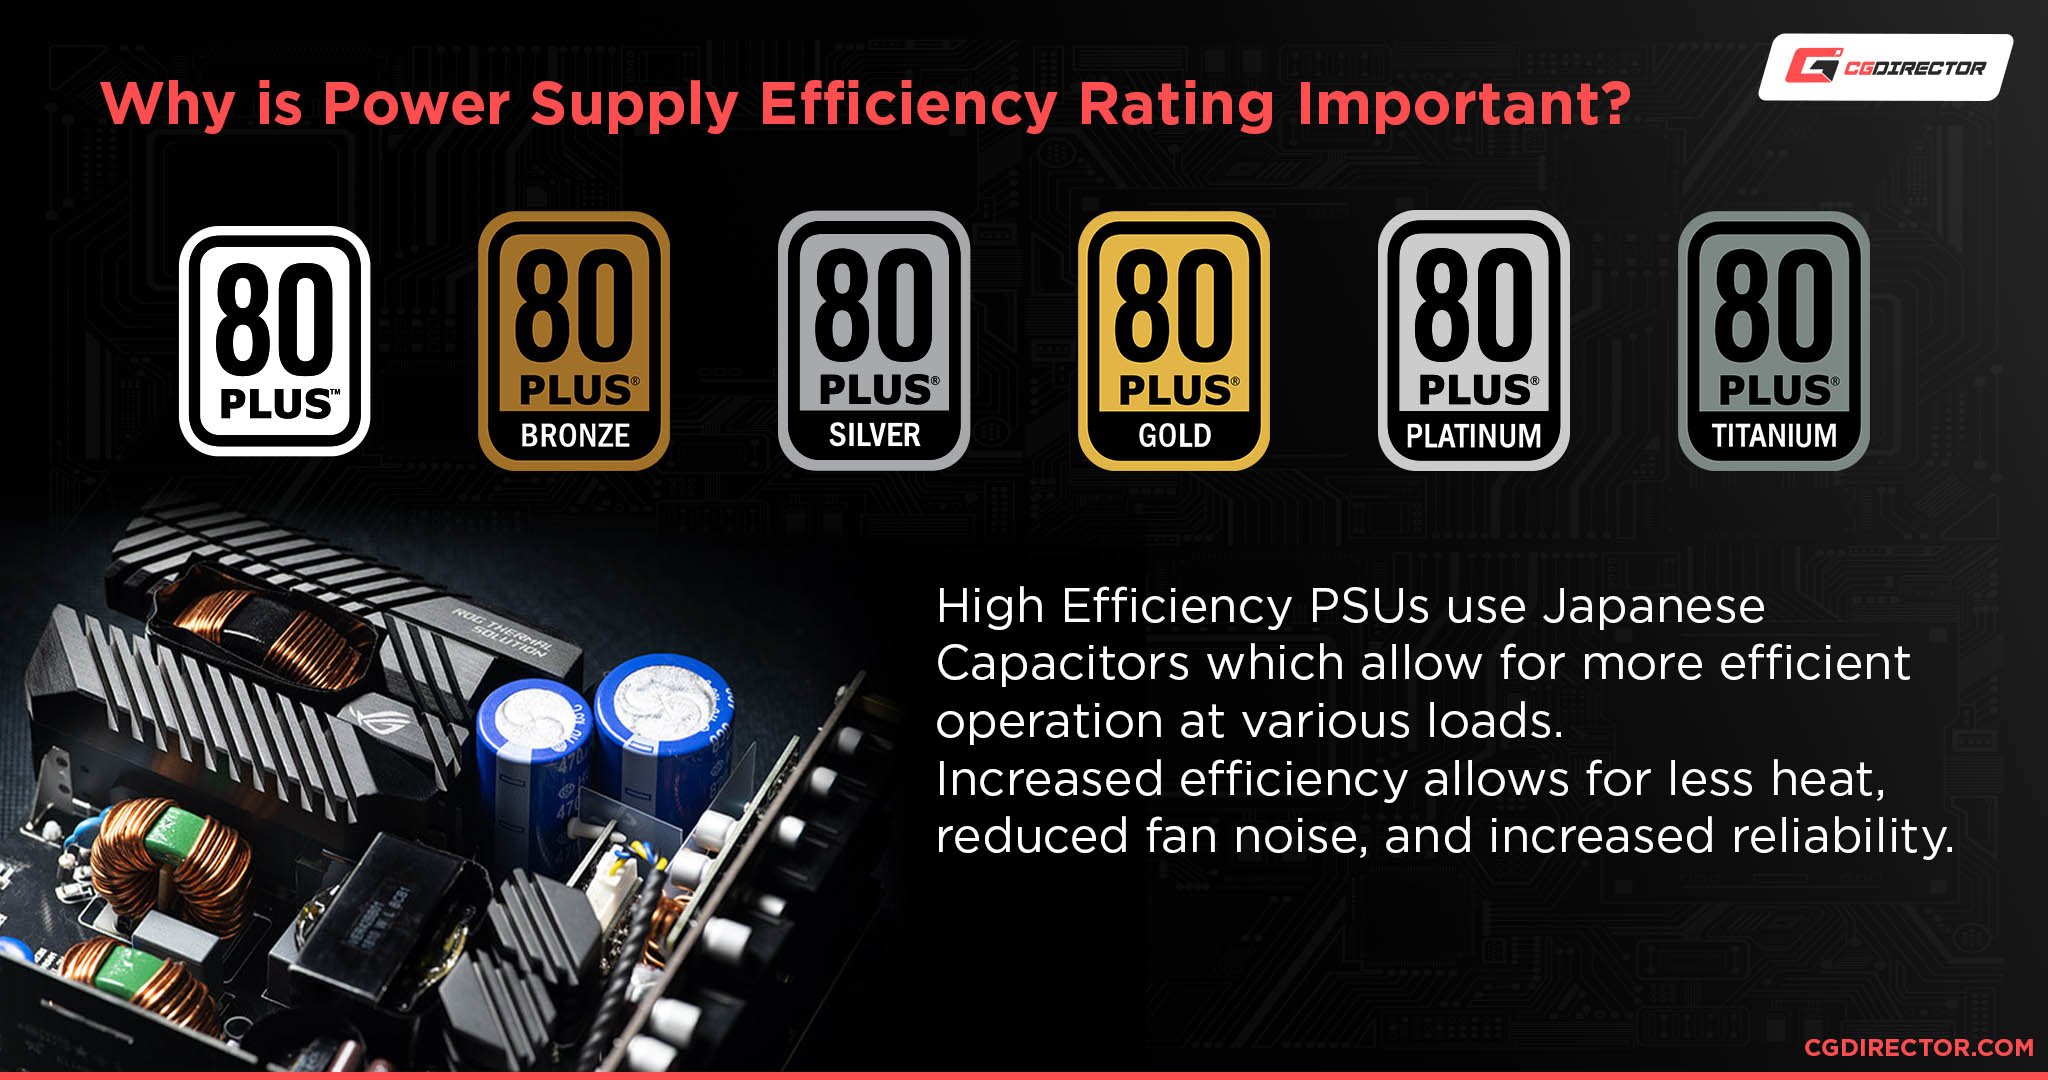 Why is Power Supply Efficiency Rating Important